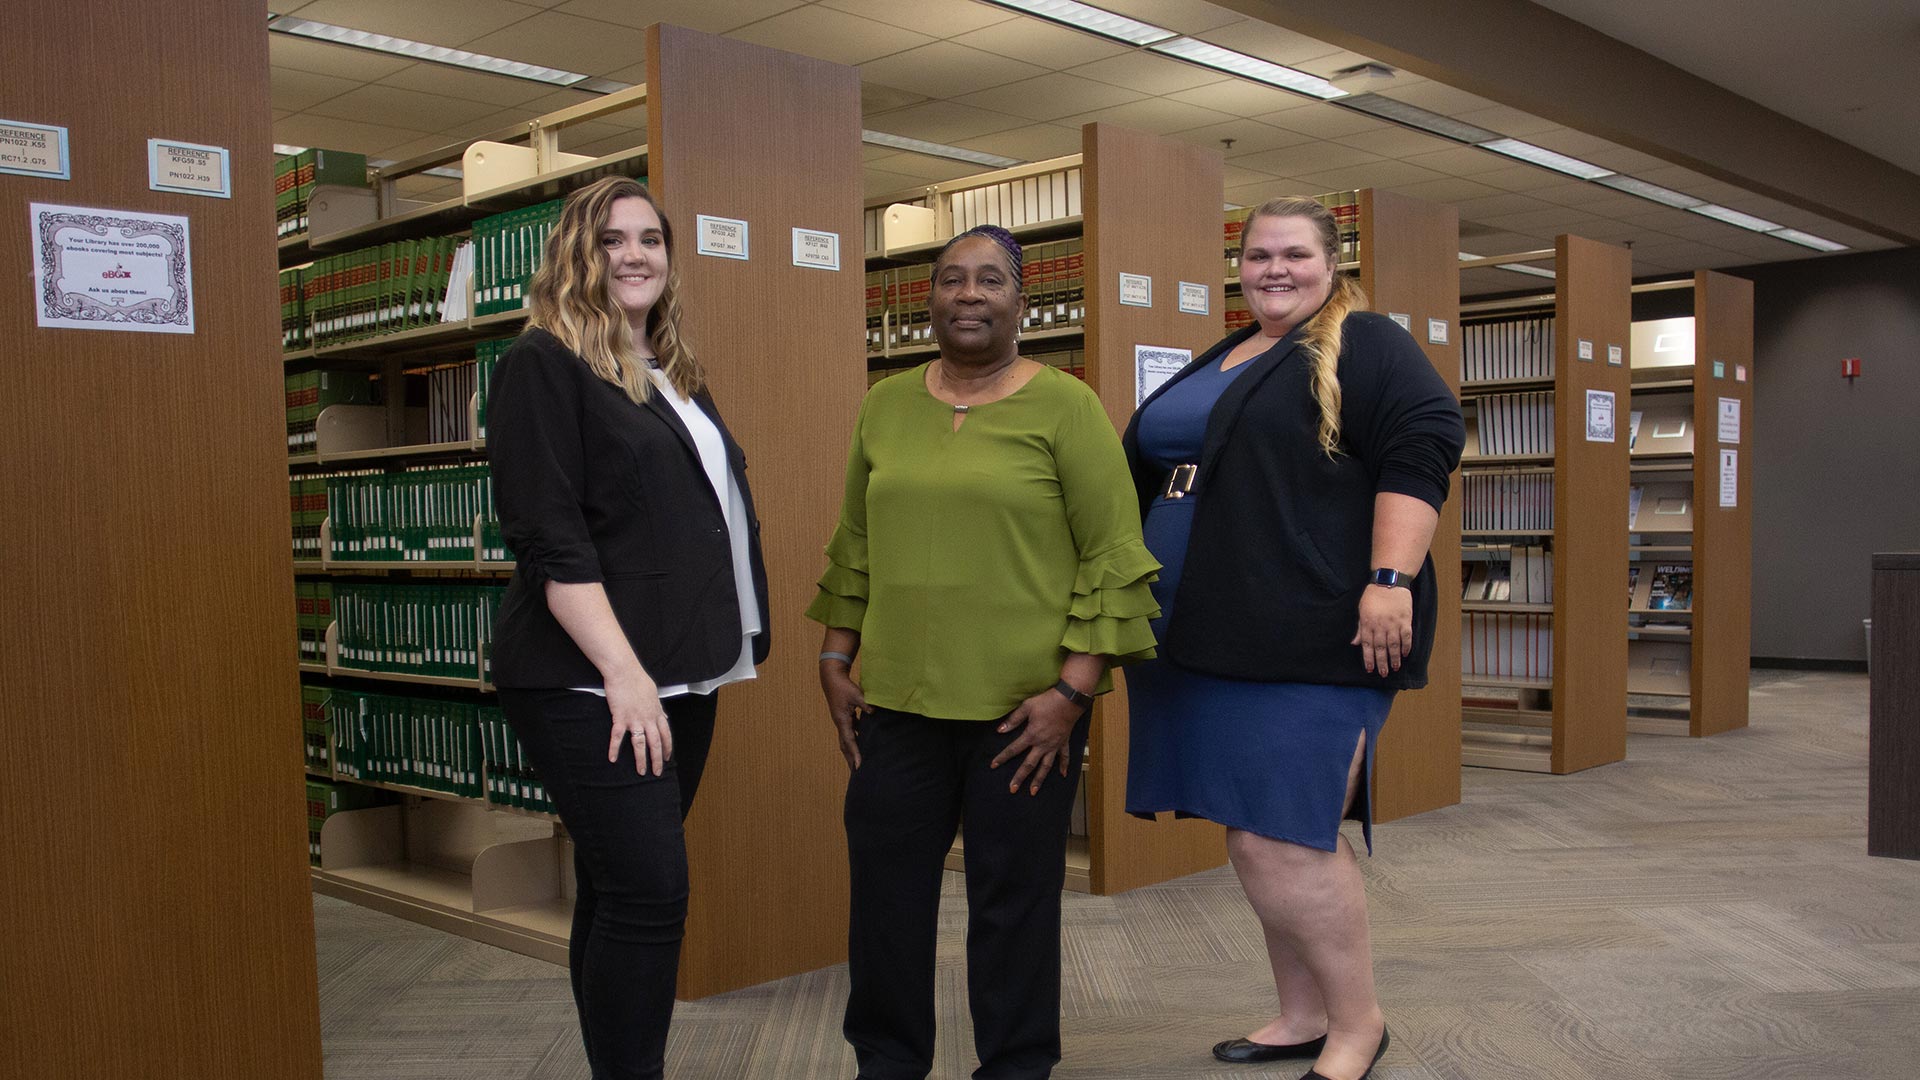 3 Females standing in front of book shelves - paralegal studies